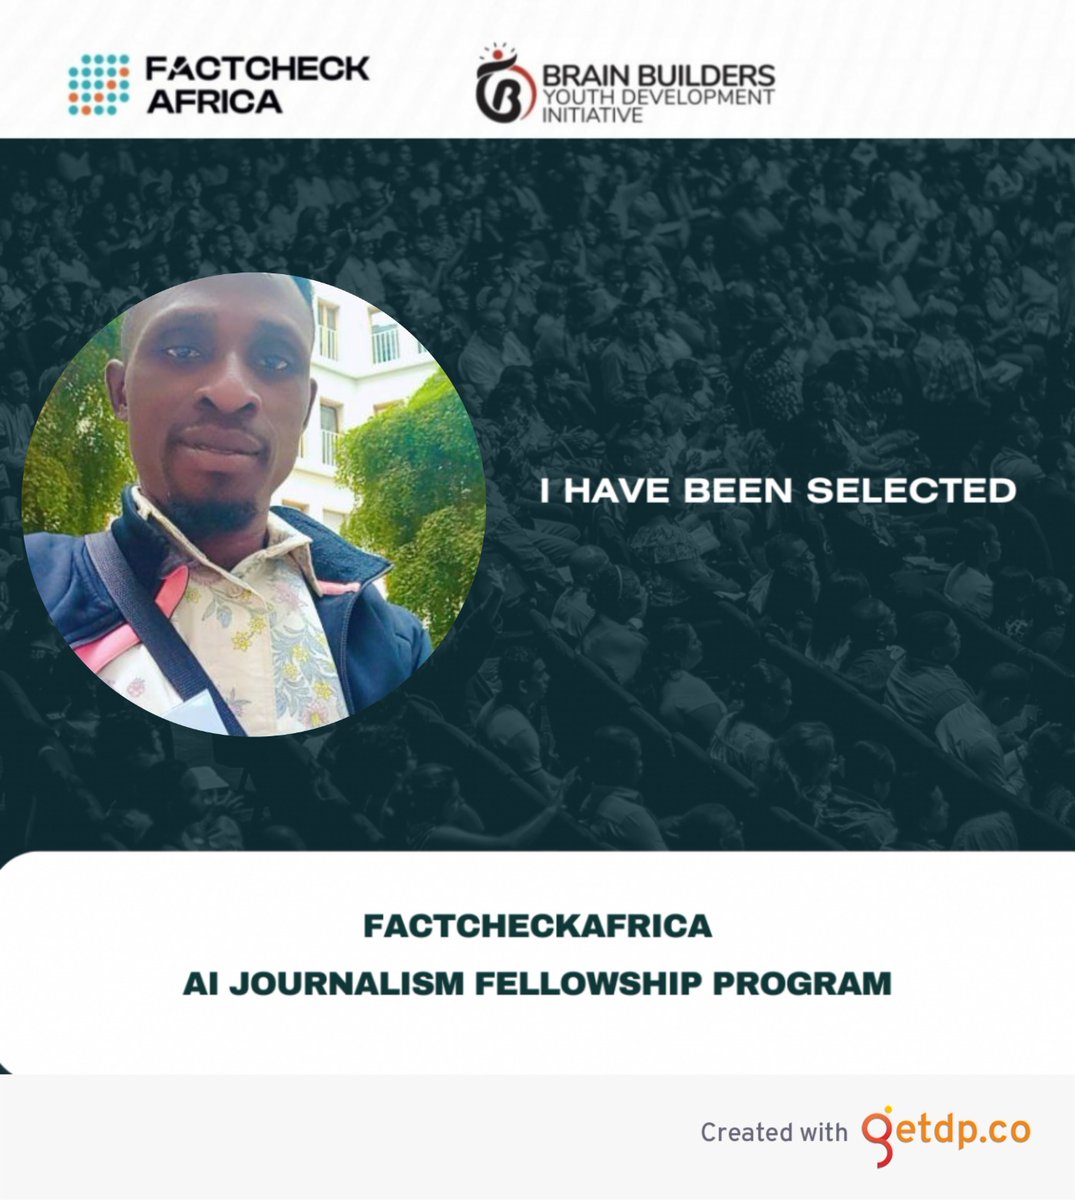 'I'm thrilled to announce that I've been accepted into the FactCheckAfrica AI Journalism Fellowship Program. @FactC_Africa @BrainBuilders01 #AIJournalismFellowship  #JournalismAI #MediaInnovation #FactCheckAfrica